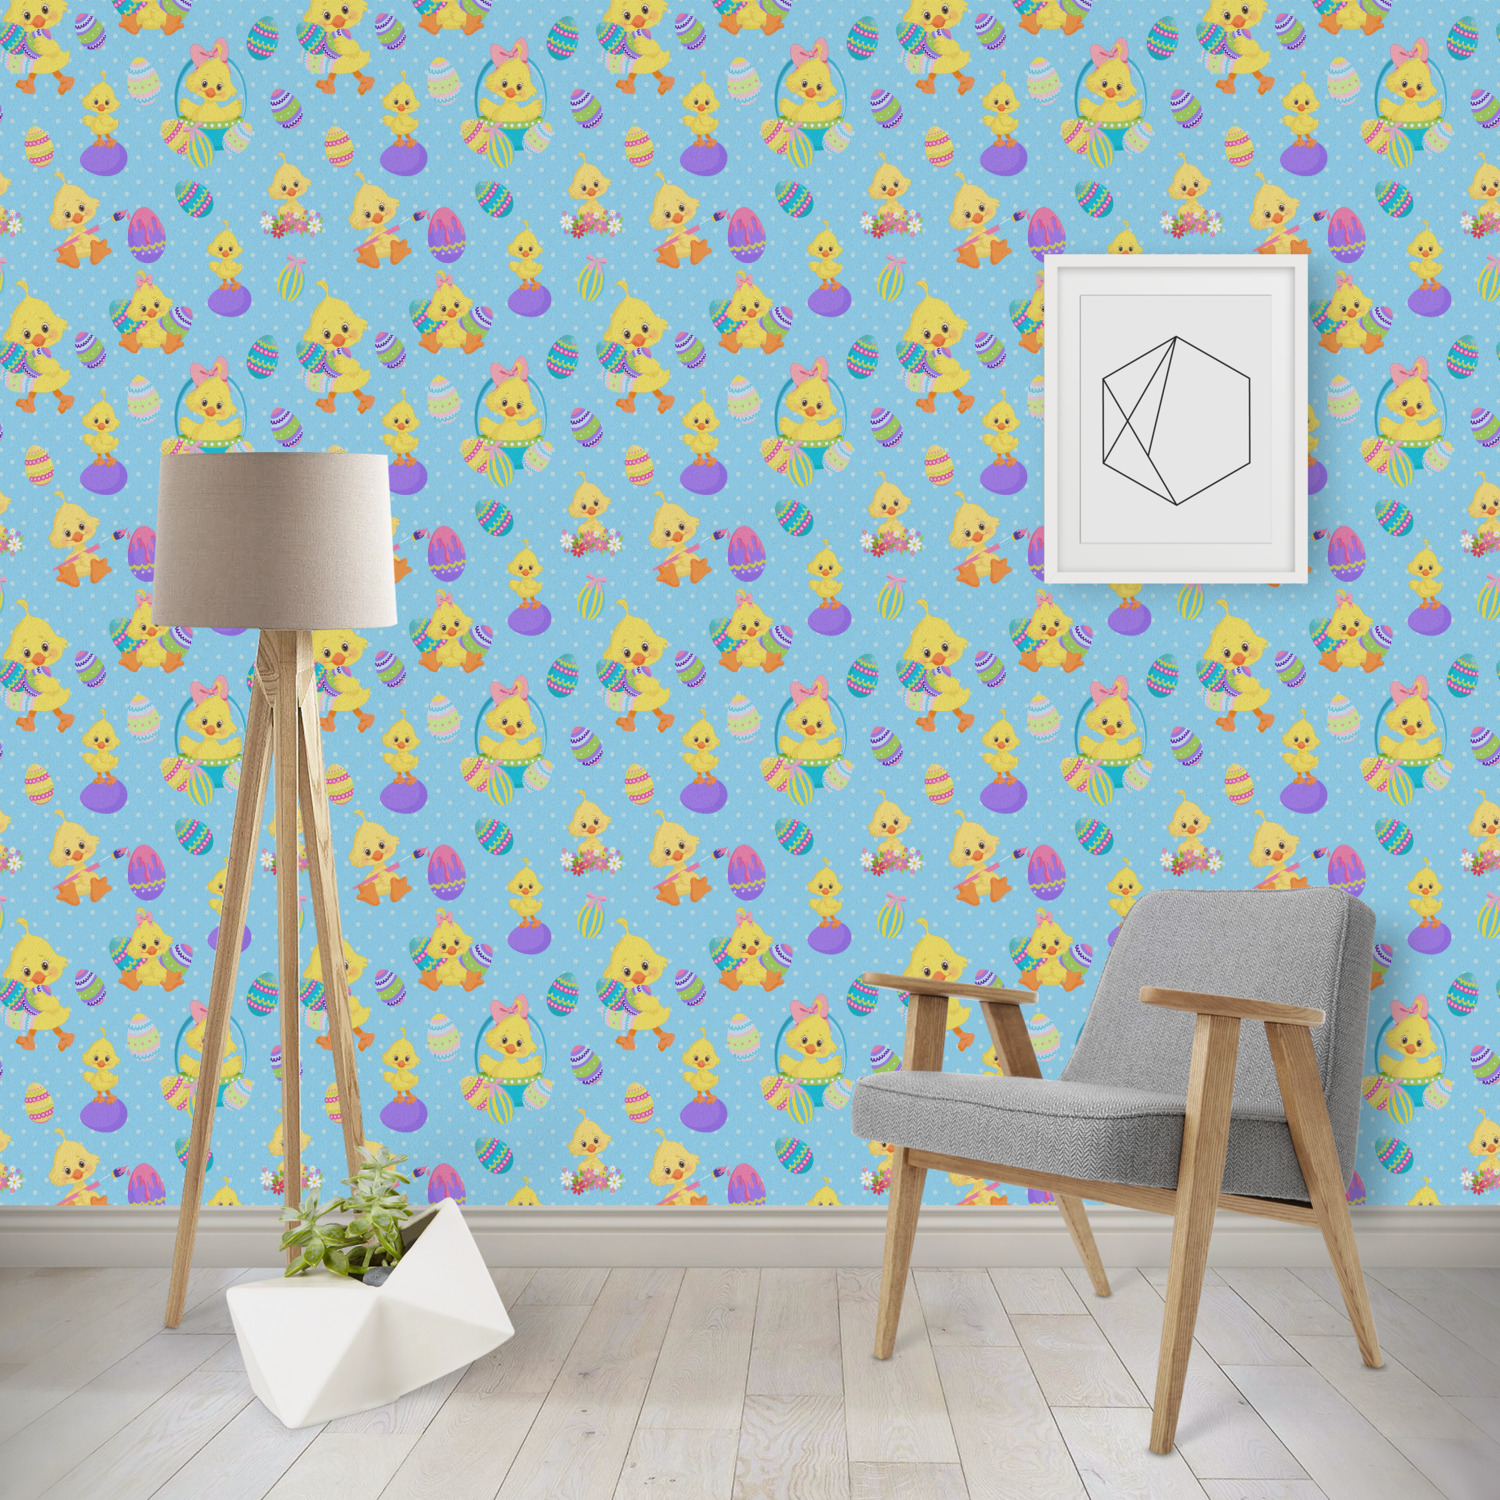 Happy easter wallpaper surface covering